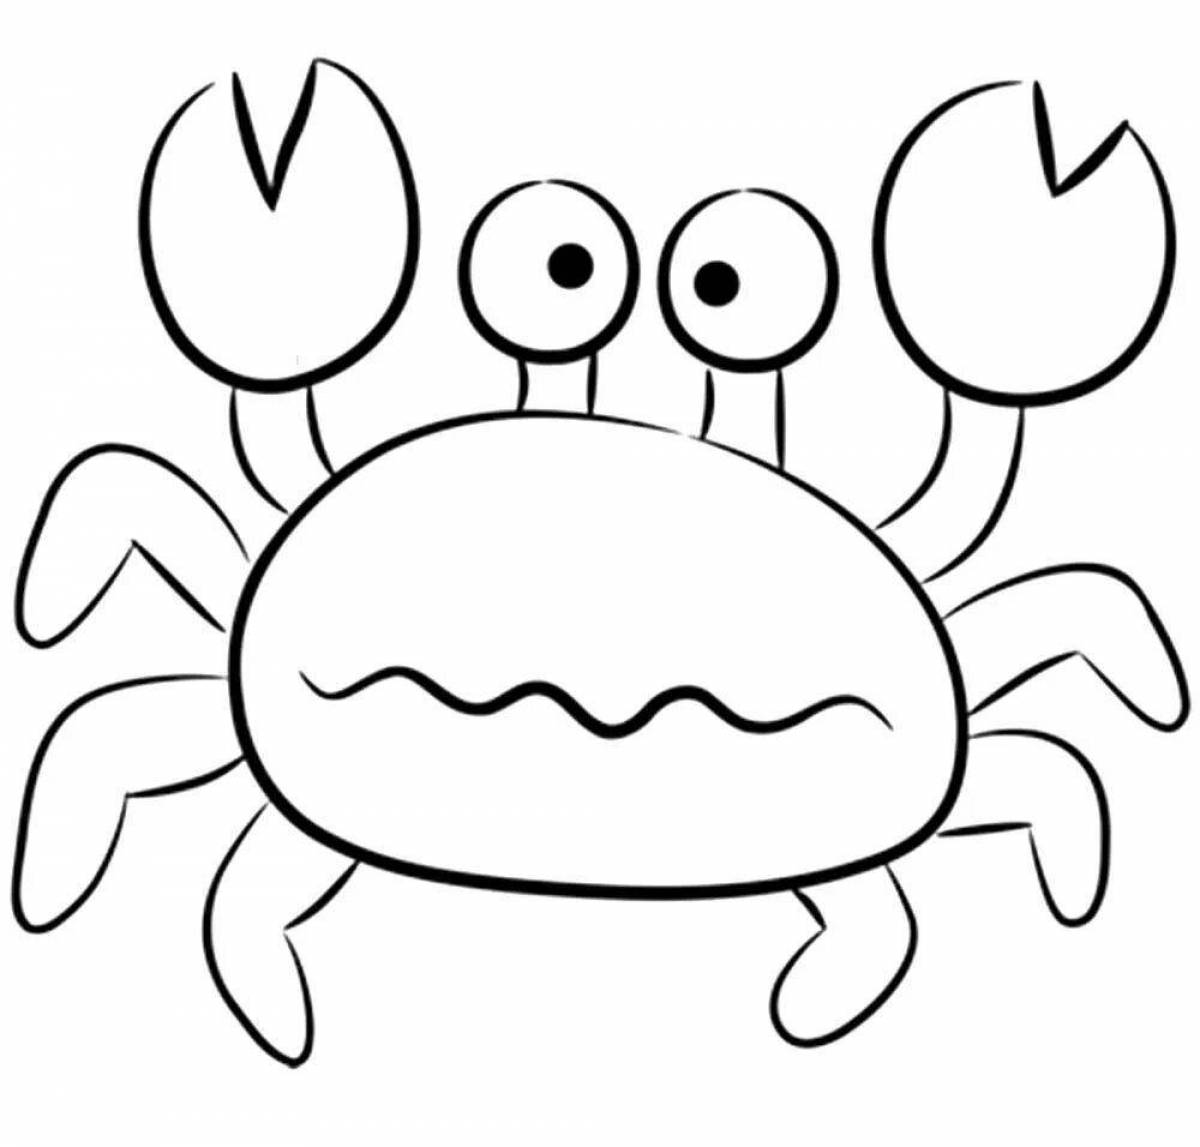 Colorful crab coloring page for kids